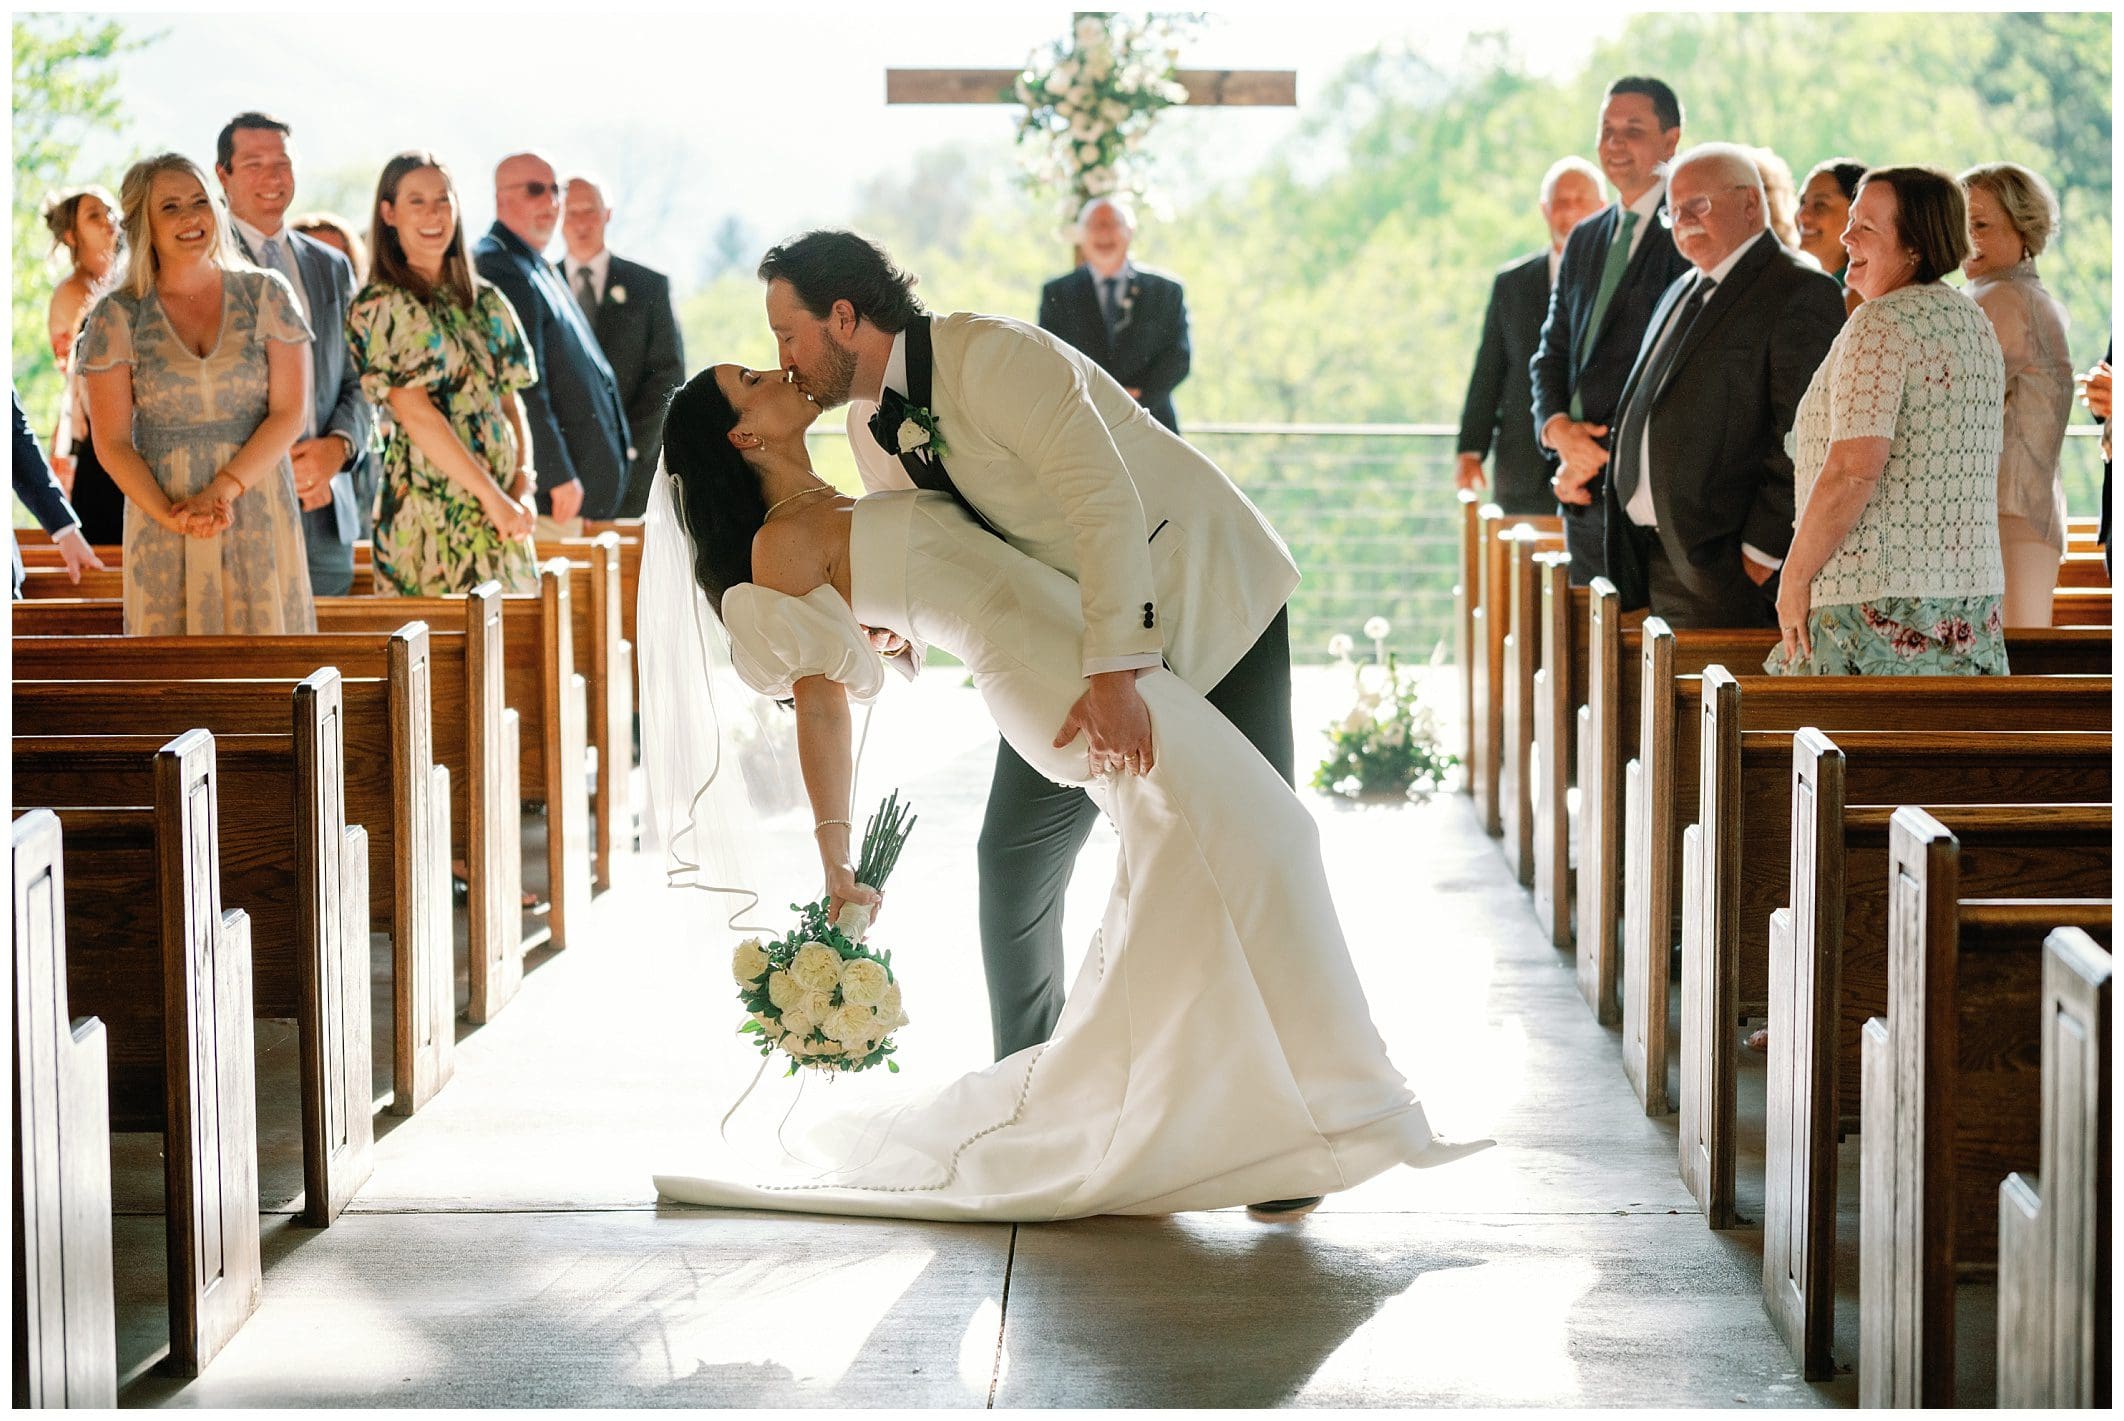 Intimate Spring Microwedding at Parker Mill , bride and groom kiss passionately in a church aisle, surrounded by smiling guests during a sunlit wedding ceremony.